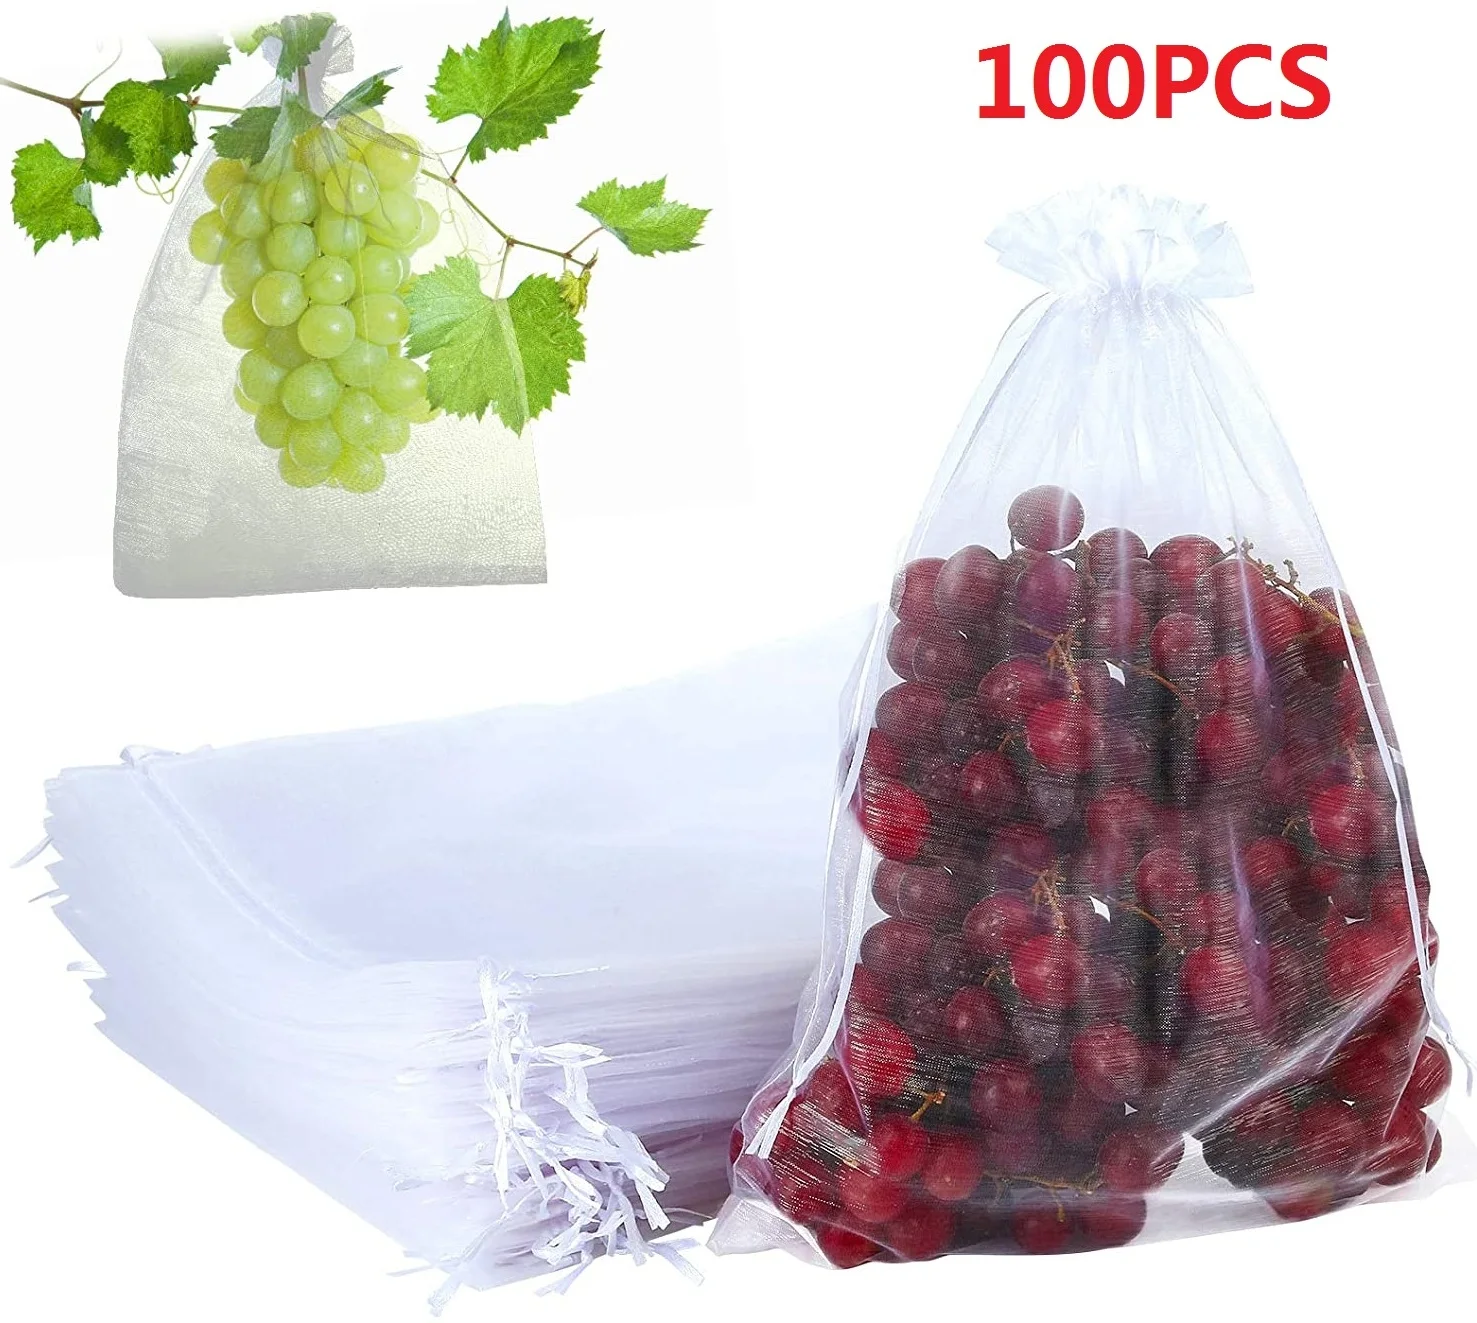 100 Pcs Strawberry Grapes Fruit Protection Bags Garden Drawstring Netting Bag Agricultural Anti-Bird Vegetable Mesh Bags